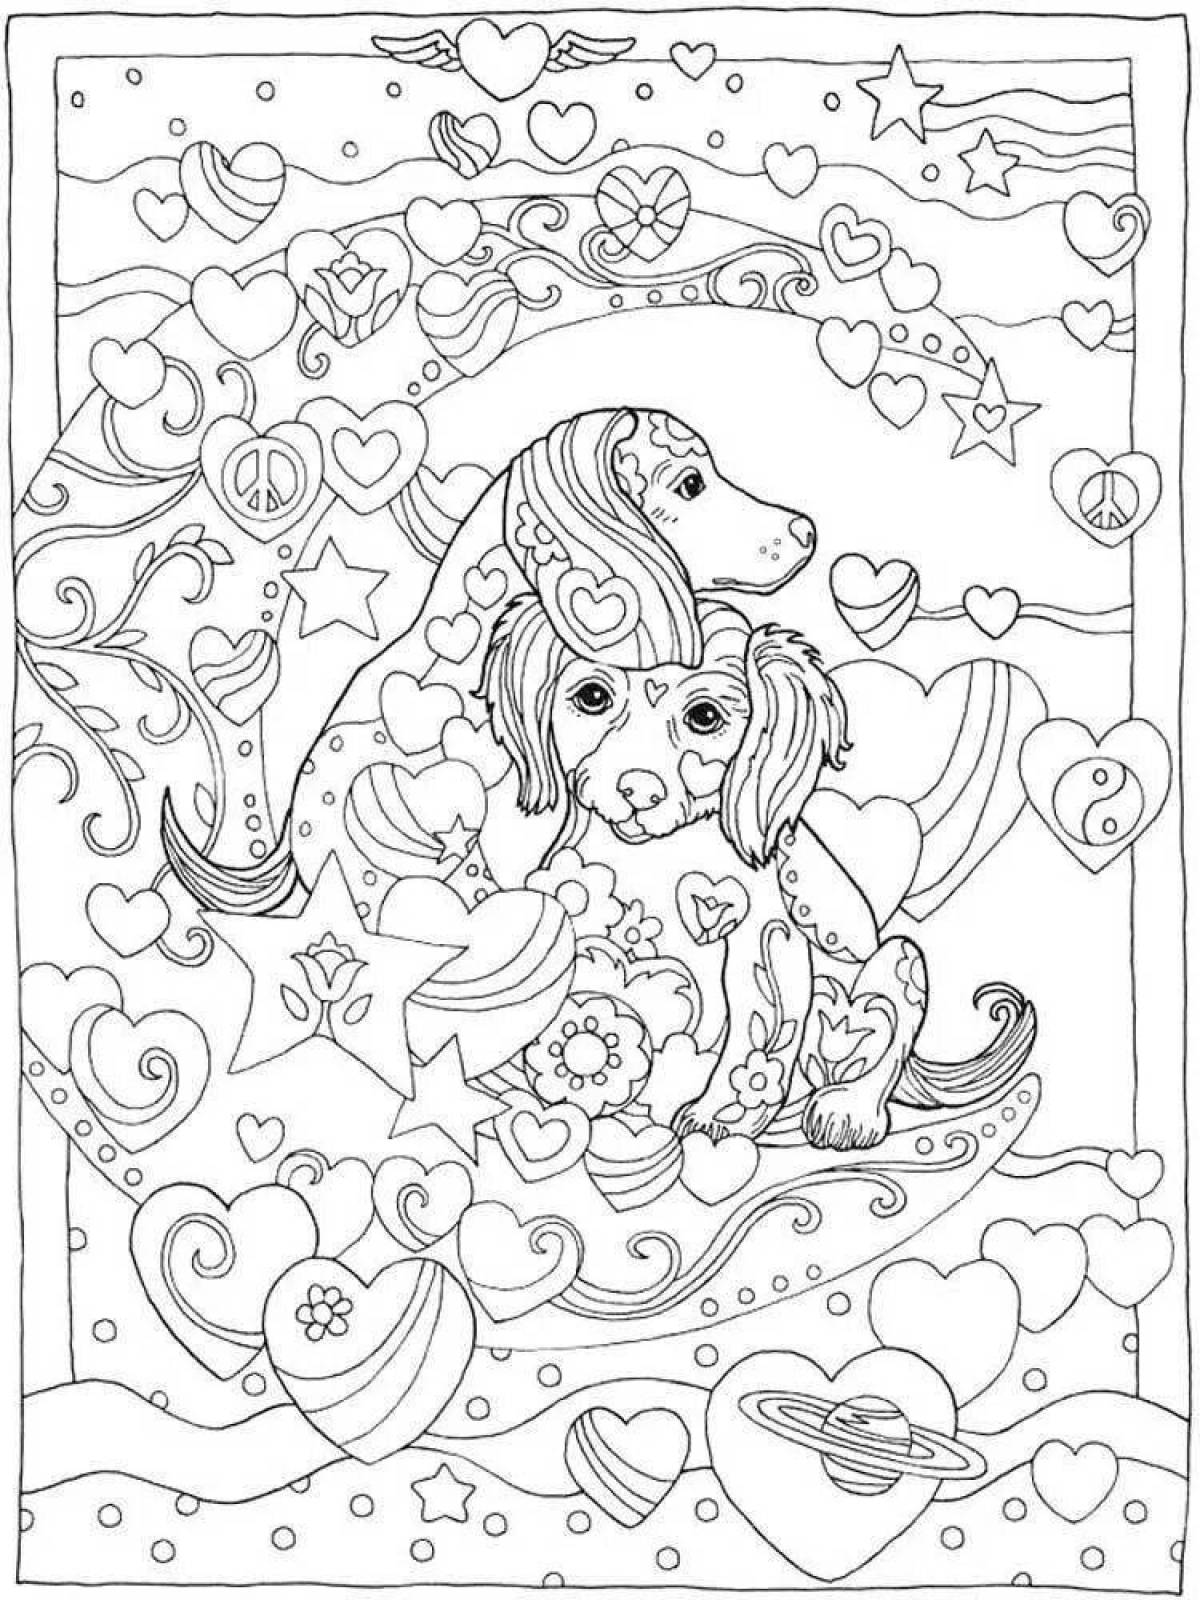 Coloring book animated antistress dog